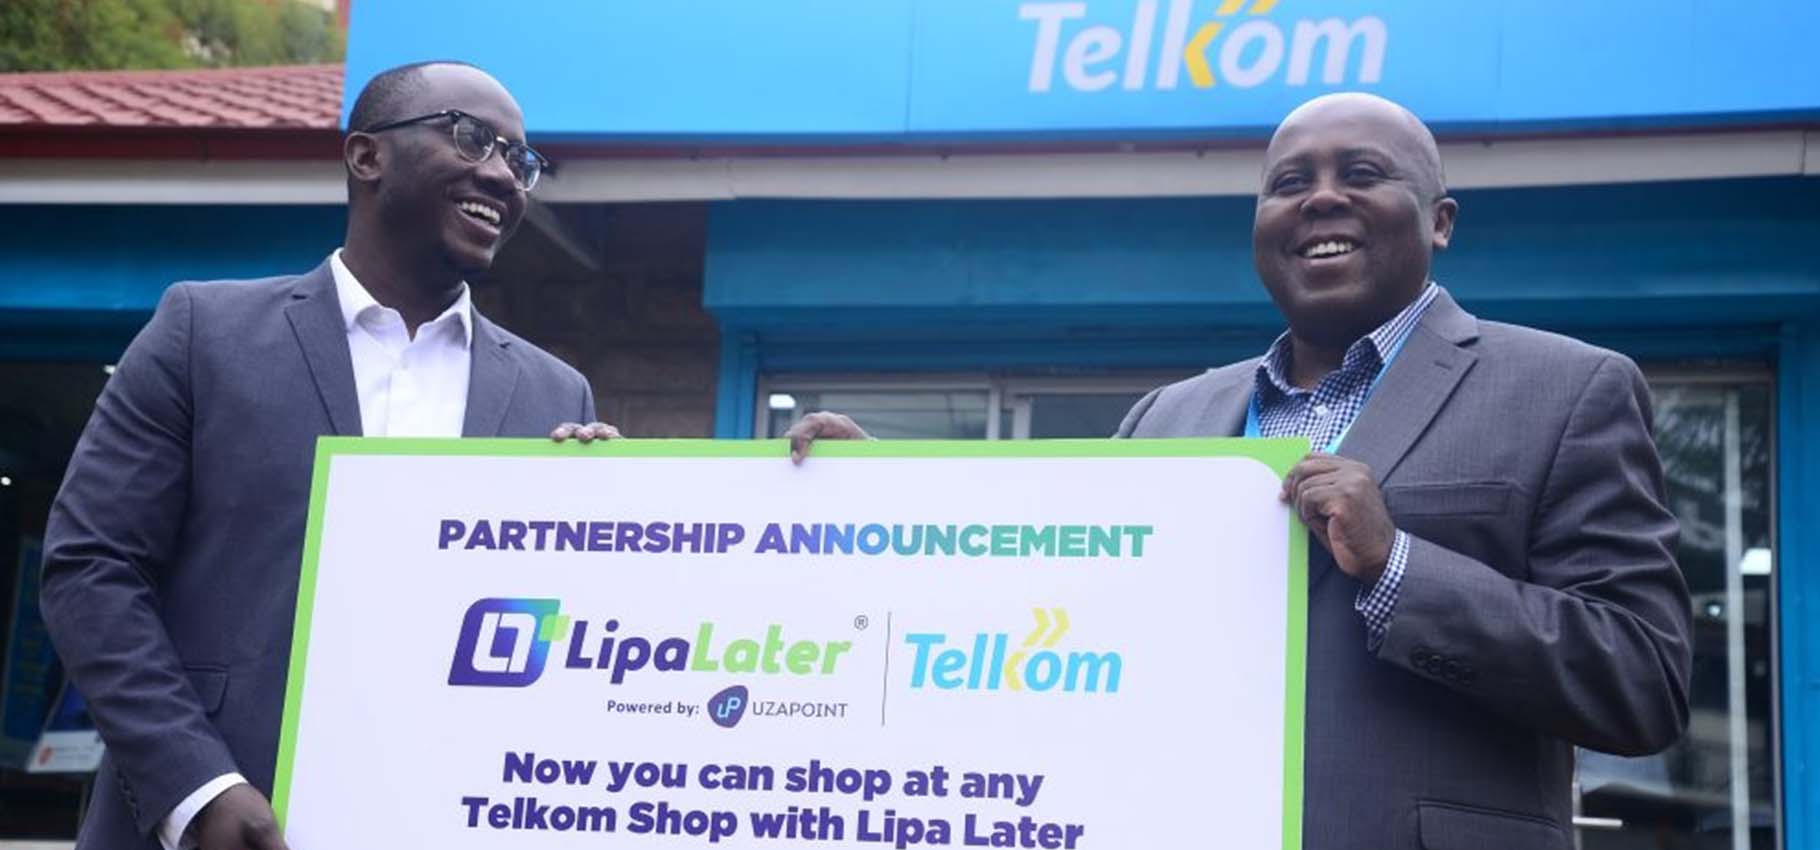 Telkom, Lipa Later to Offer Product Financing Solutions for Smart Mobile Devices in Kenya